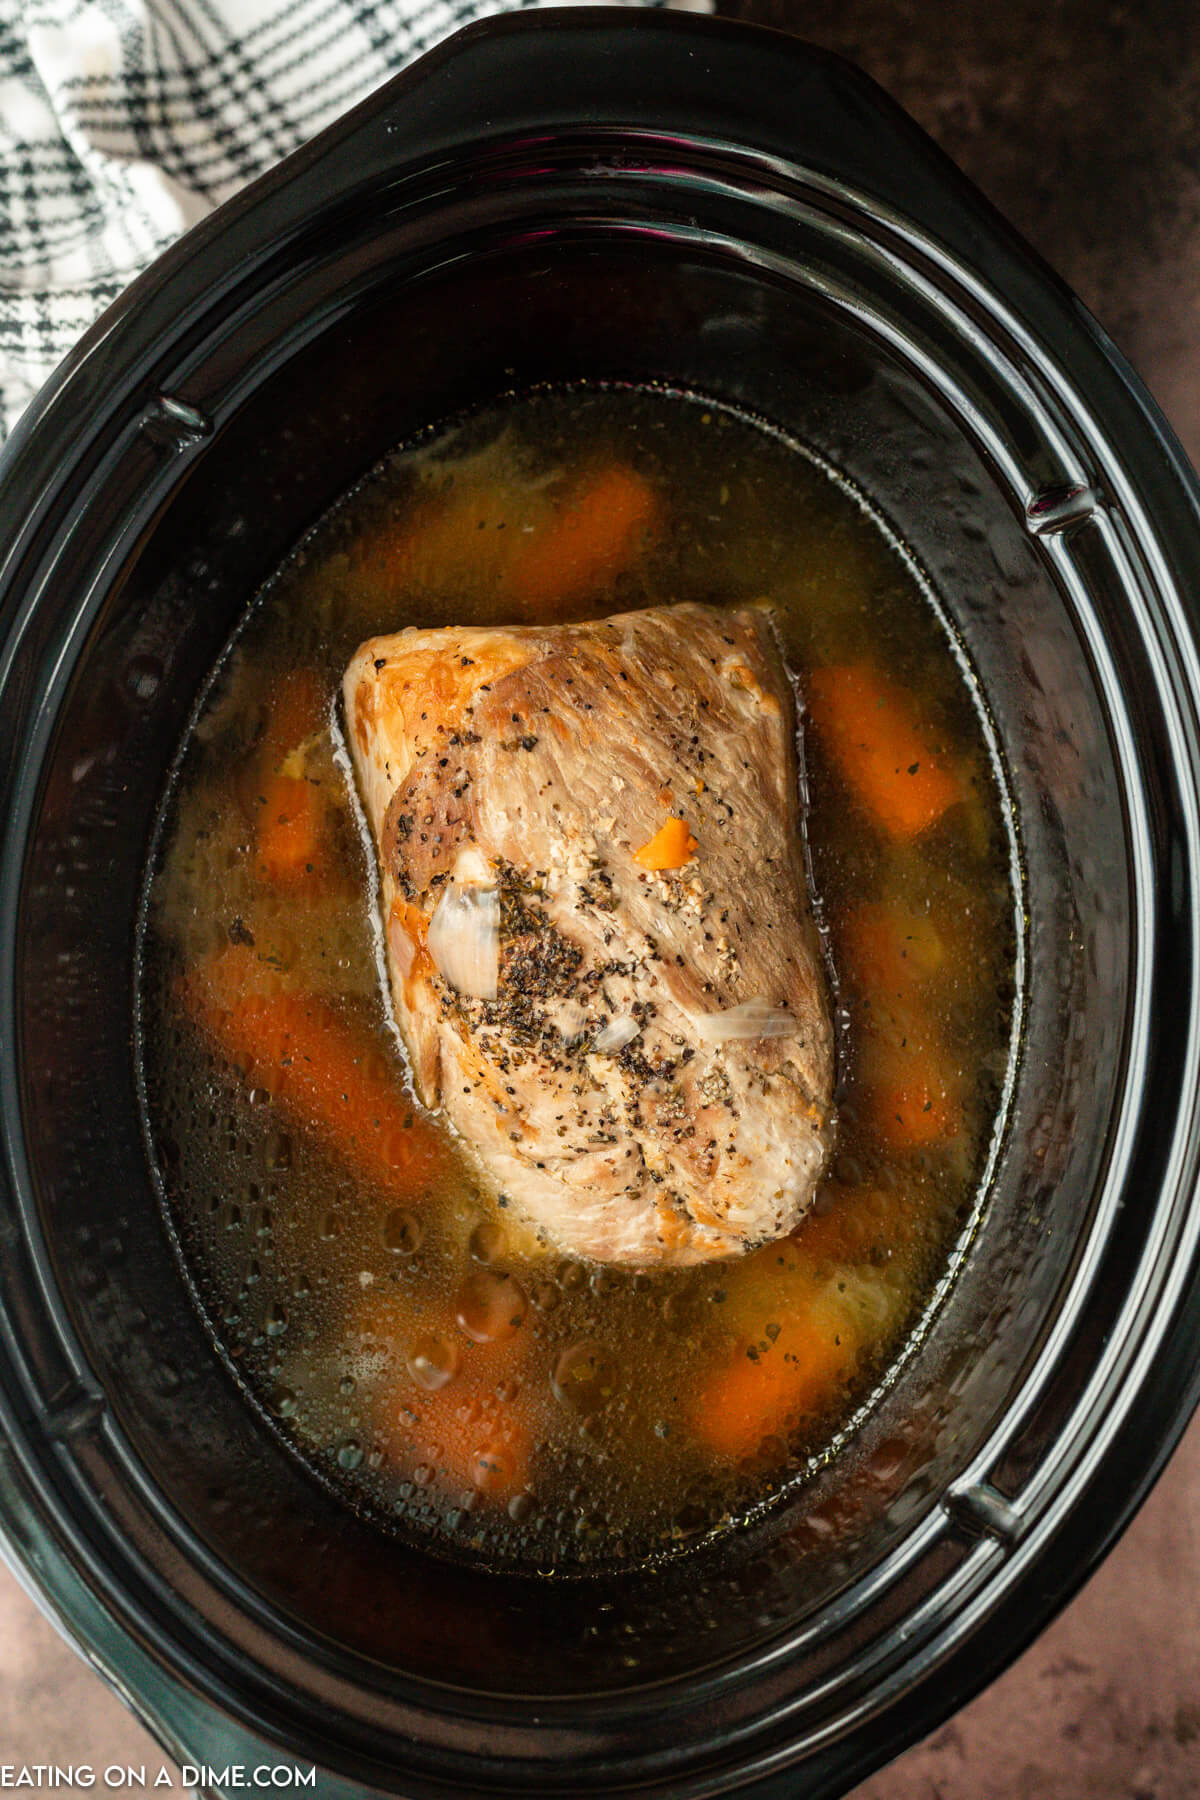 The cooked pork roast in the crock pot with carrots and onions and gravy around the pork.  